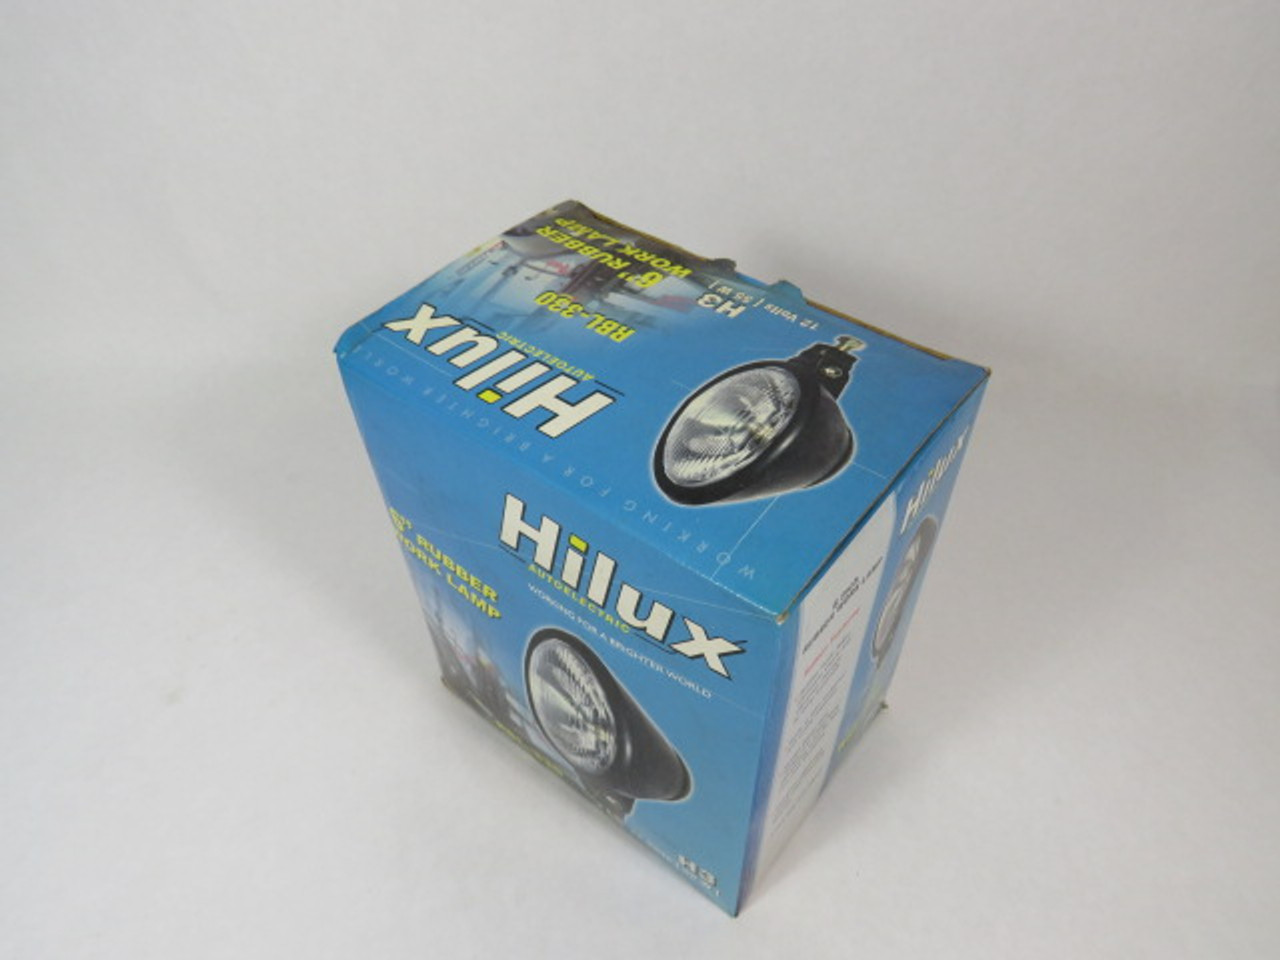 Hilux  RBL-330 3H 6" Rubber Work Lamp 12V 55W ! NEW !